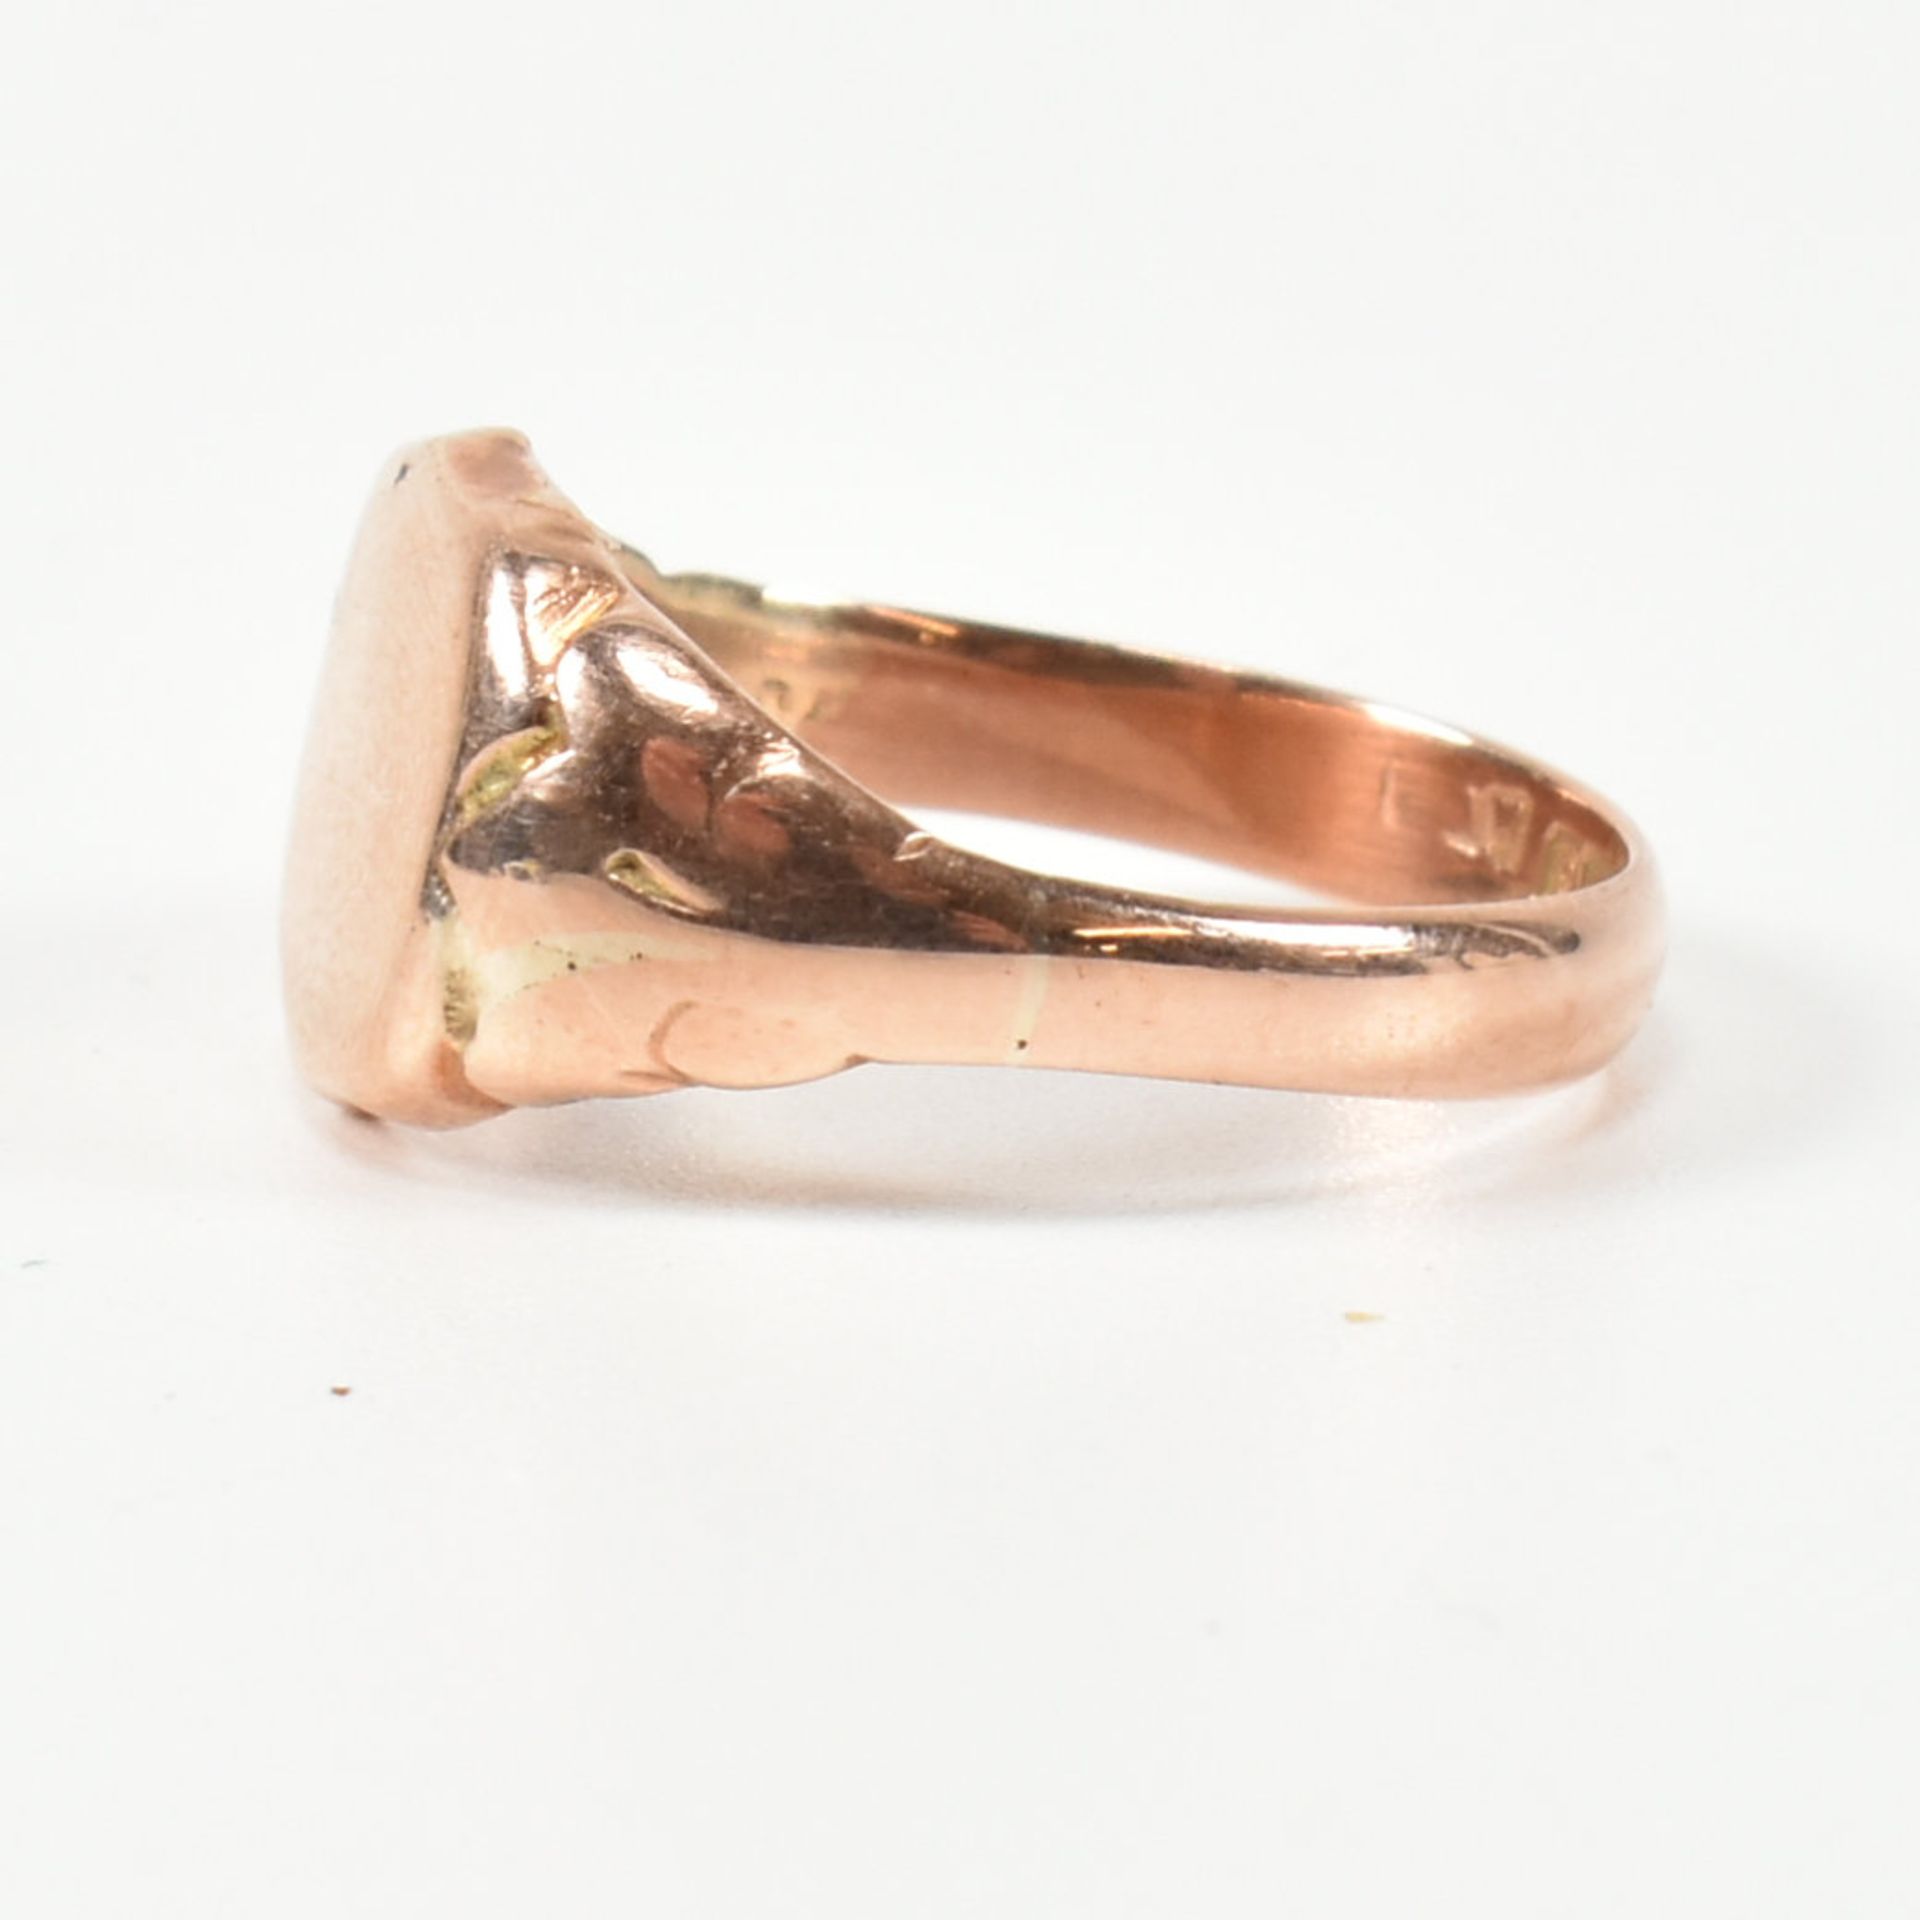 EARLY 20TH CENTURY HALLMARKED 9CT ROSE GOLD SHIELD SIGNET RING - Image 3 of 7